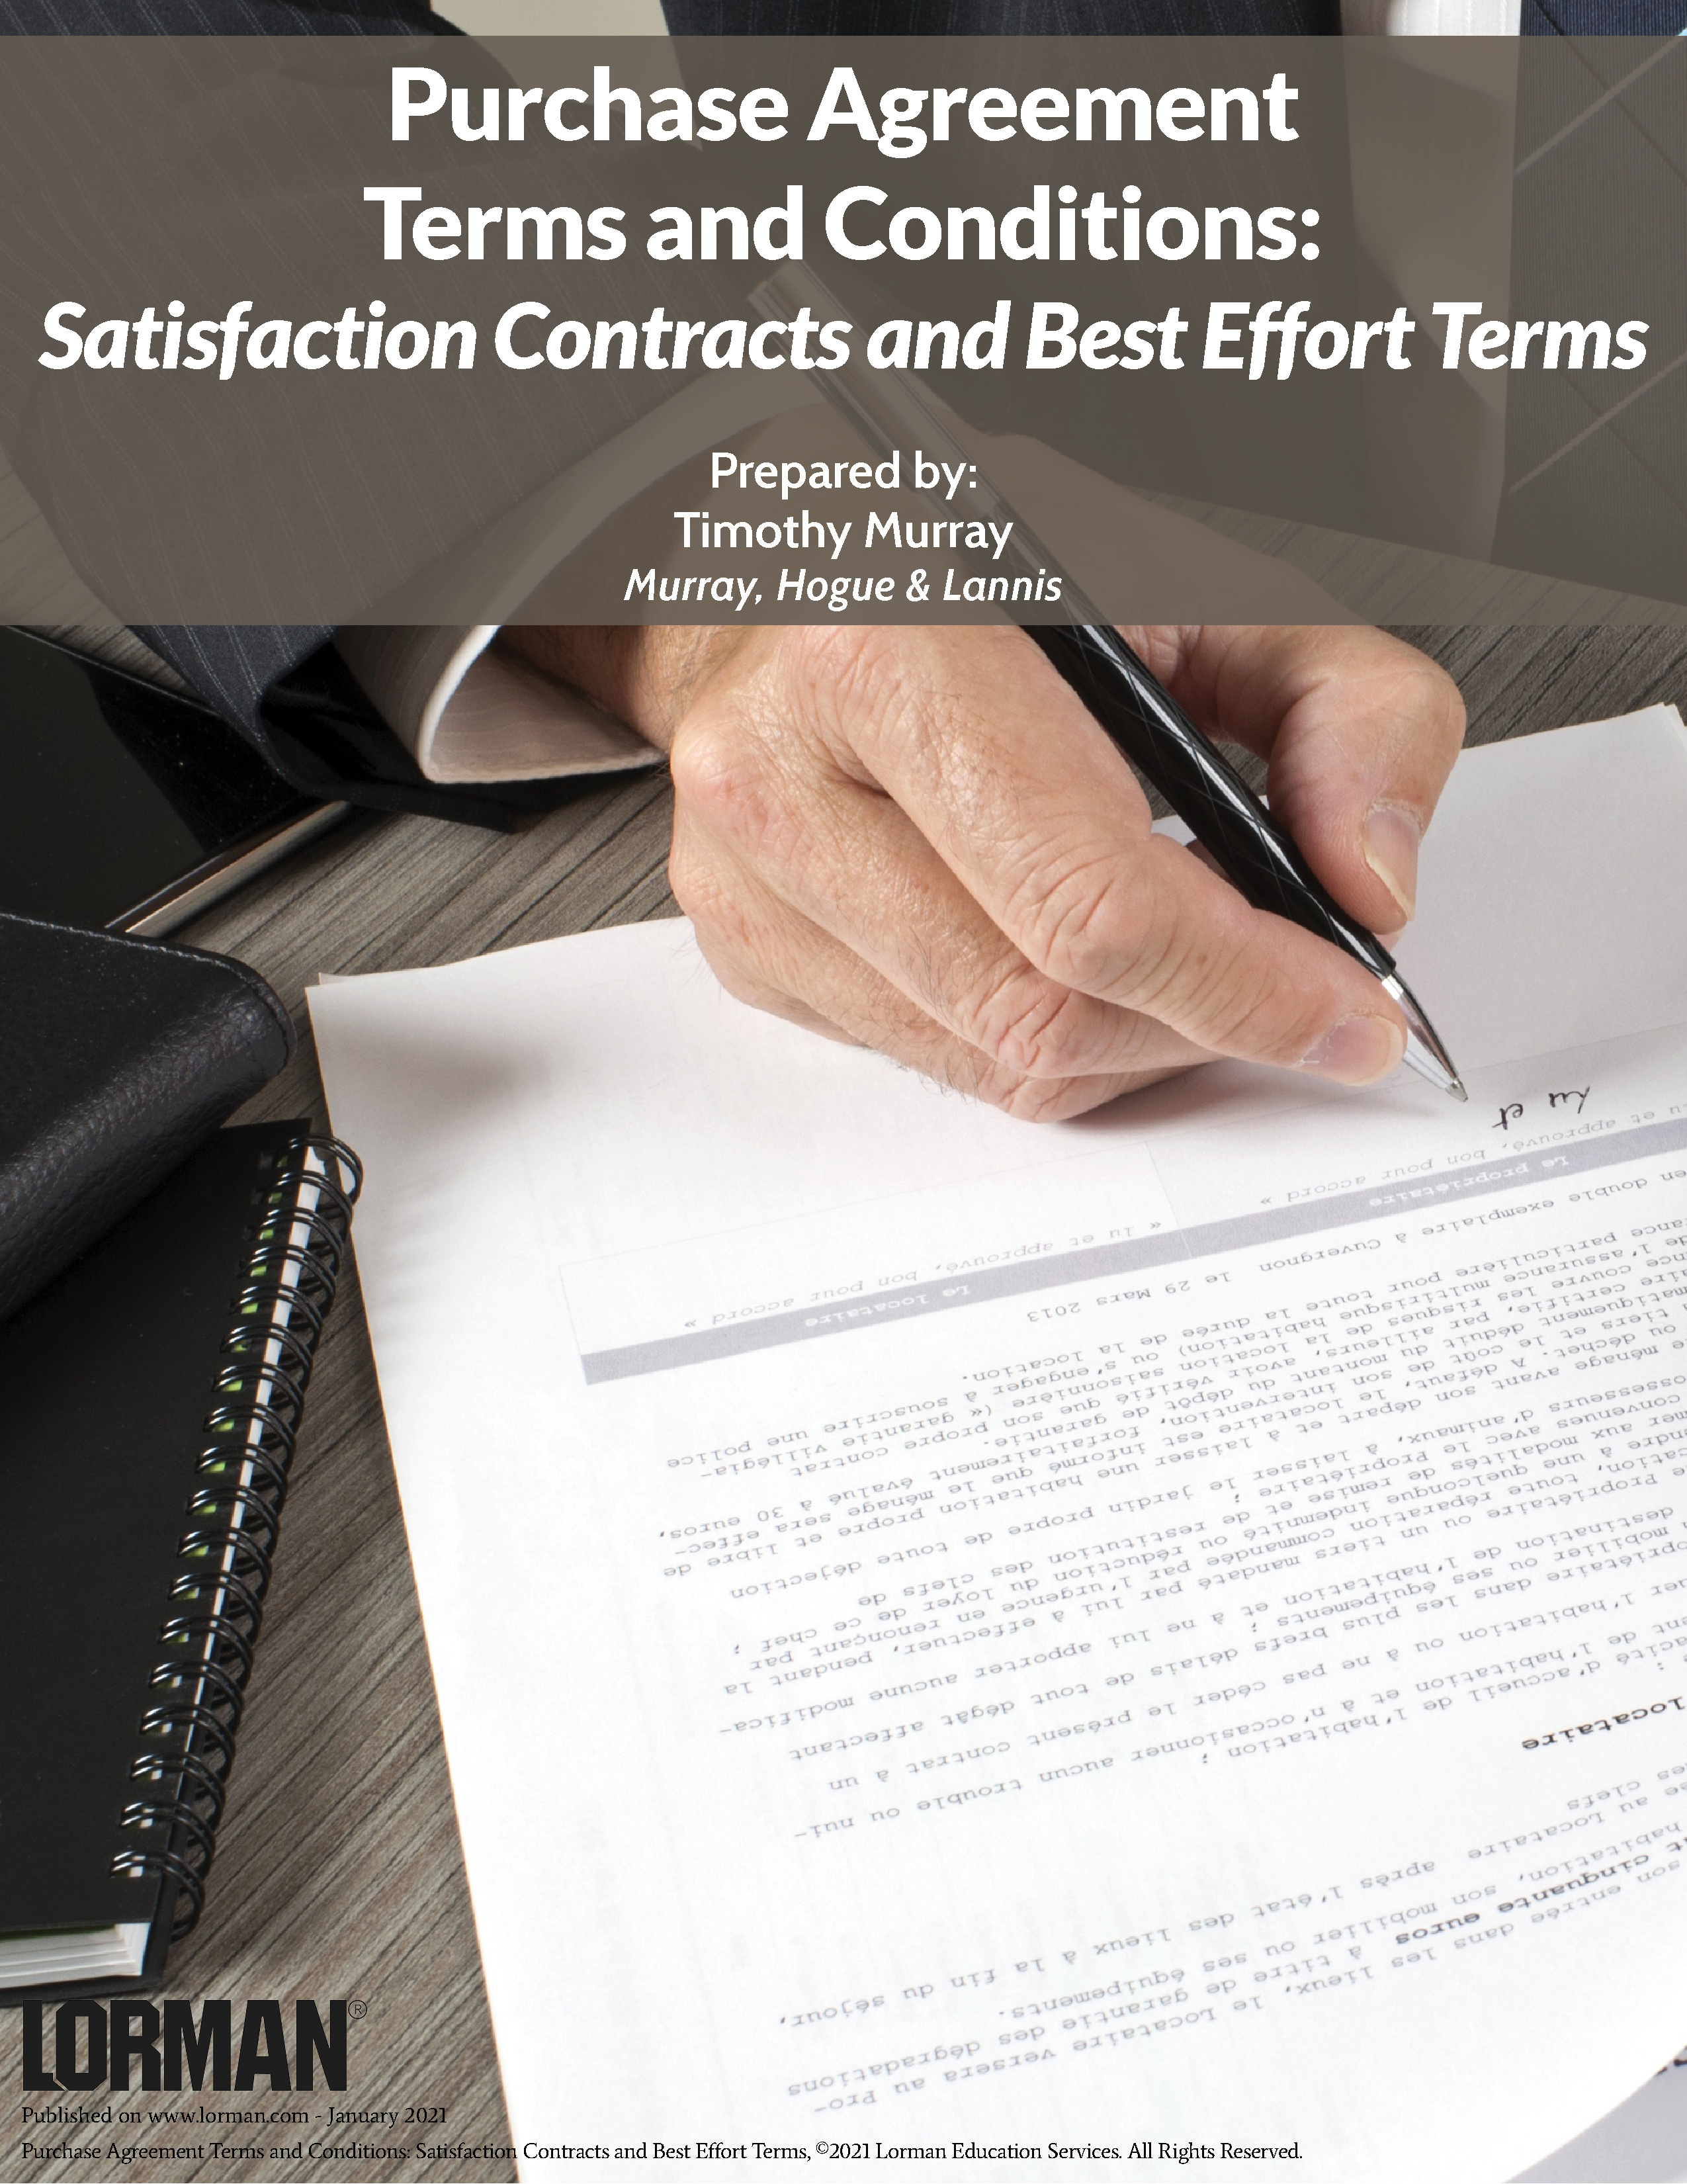 Purchase Agreement Terms and Conditions: Satisfaction Contracts and Best Effort Terms